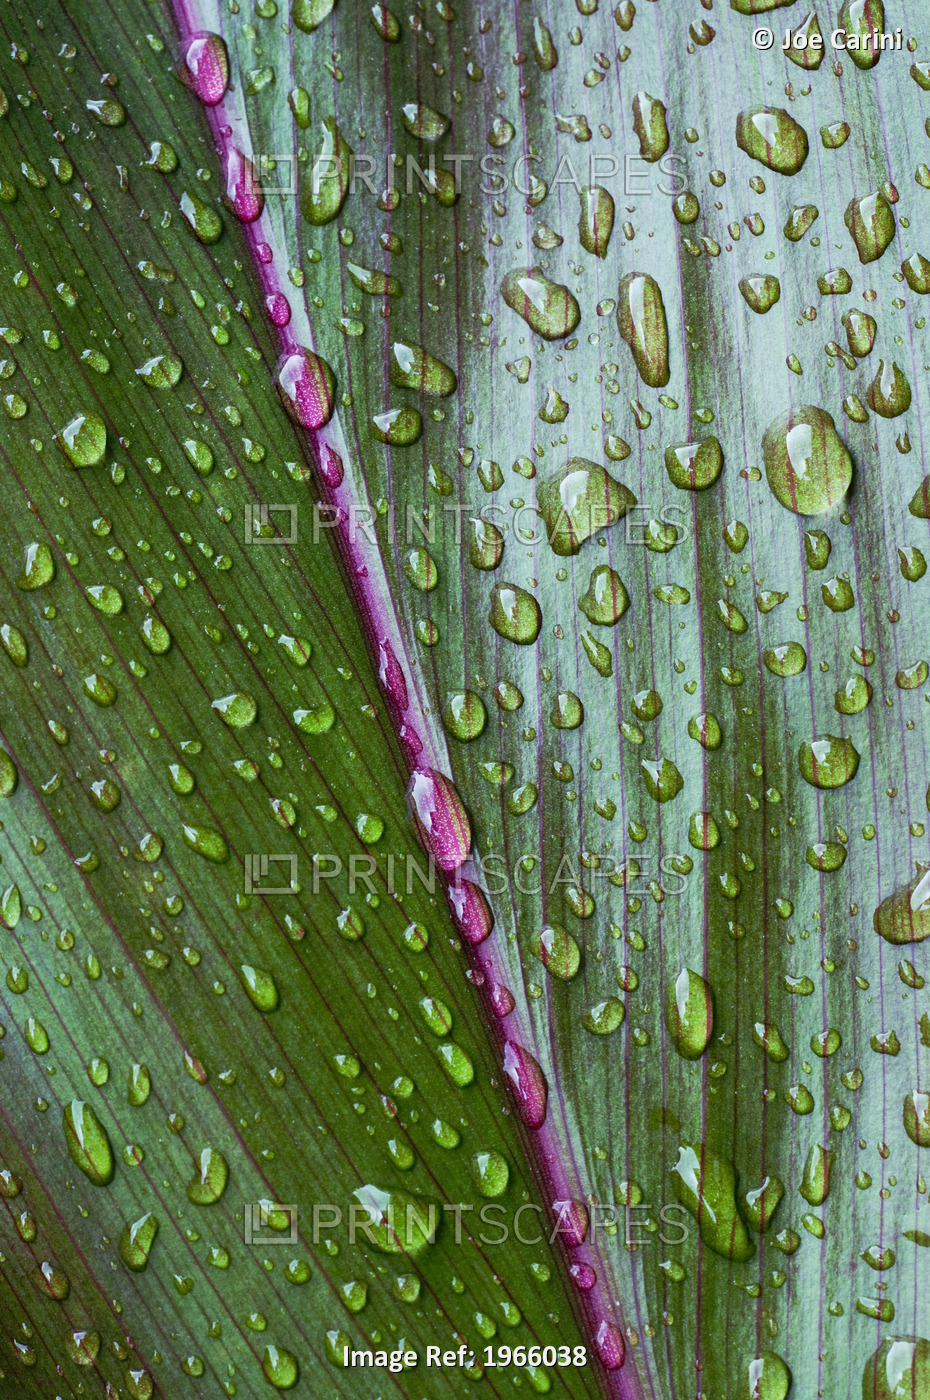 Hawaii, Oahu, Close Up Of Green Ti Leaf With Raindrops.